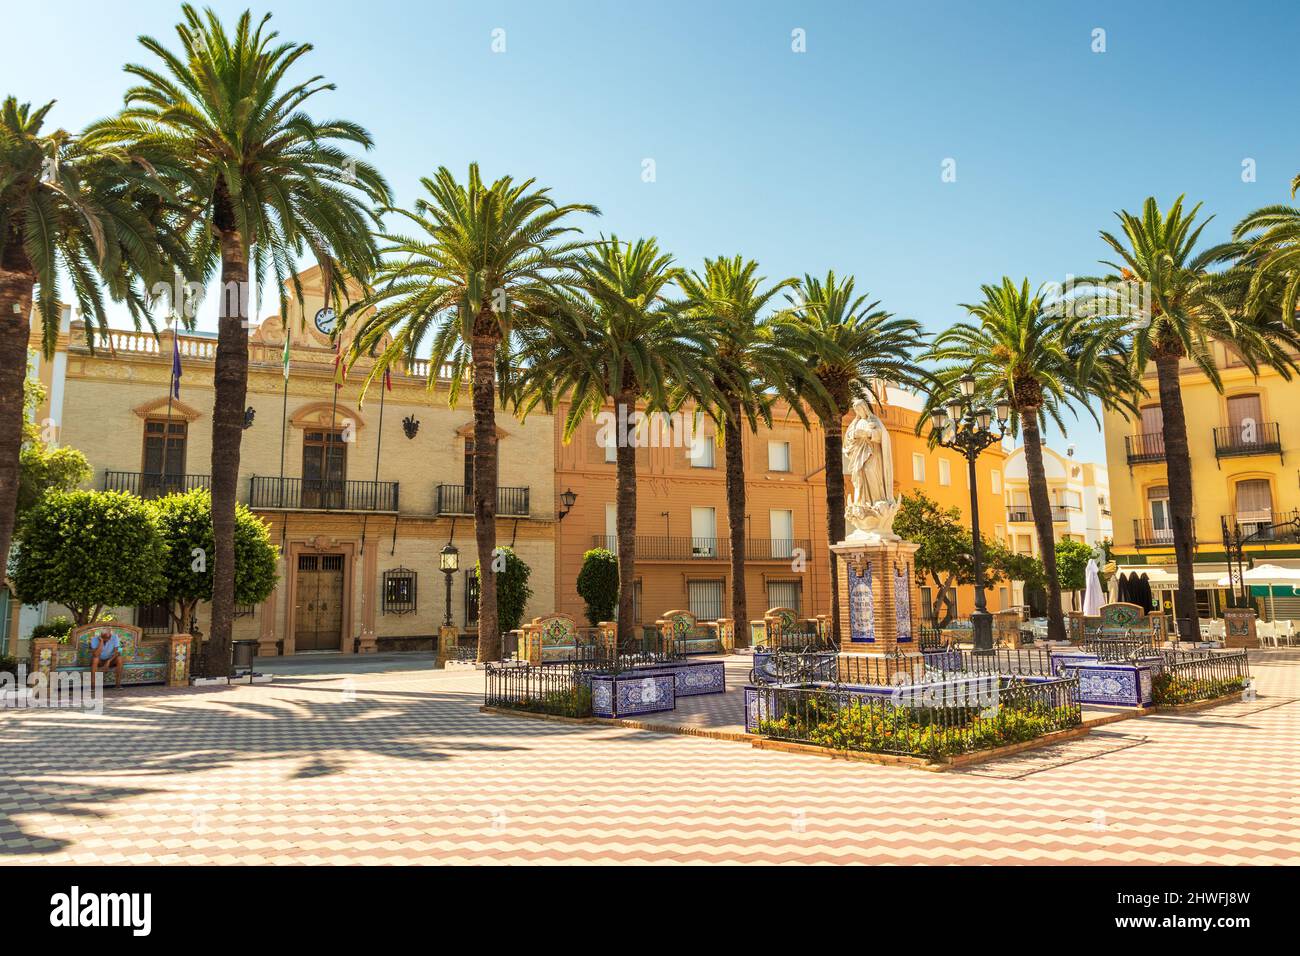 Ayamonte, Spain - July 29, 2021: Plaza de la Laguna in Ayamonte, Spain, with the Inmaculada Concepcion monument in the center of the square. Stock Photo